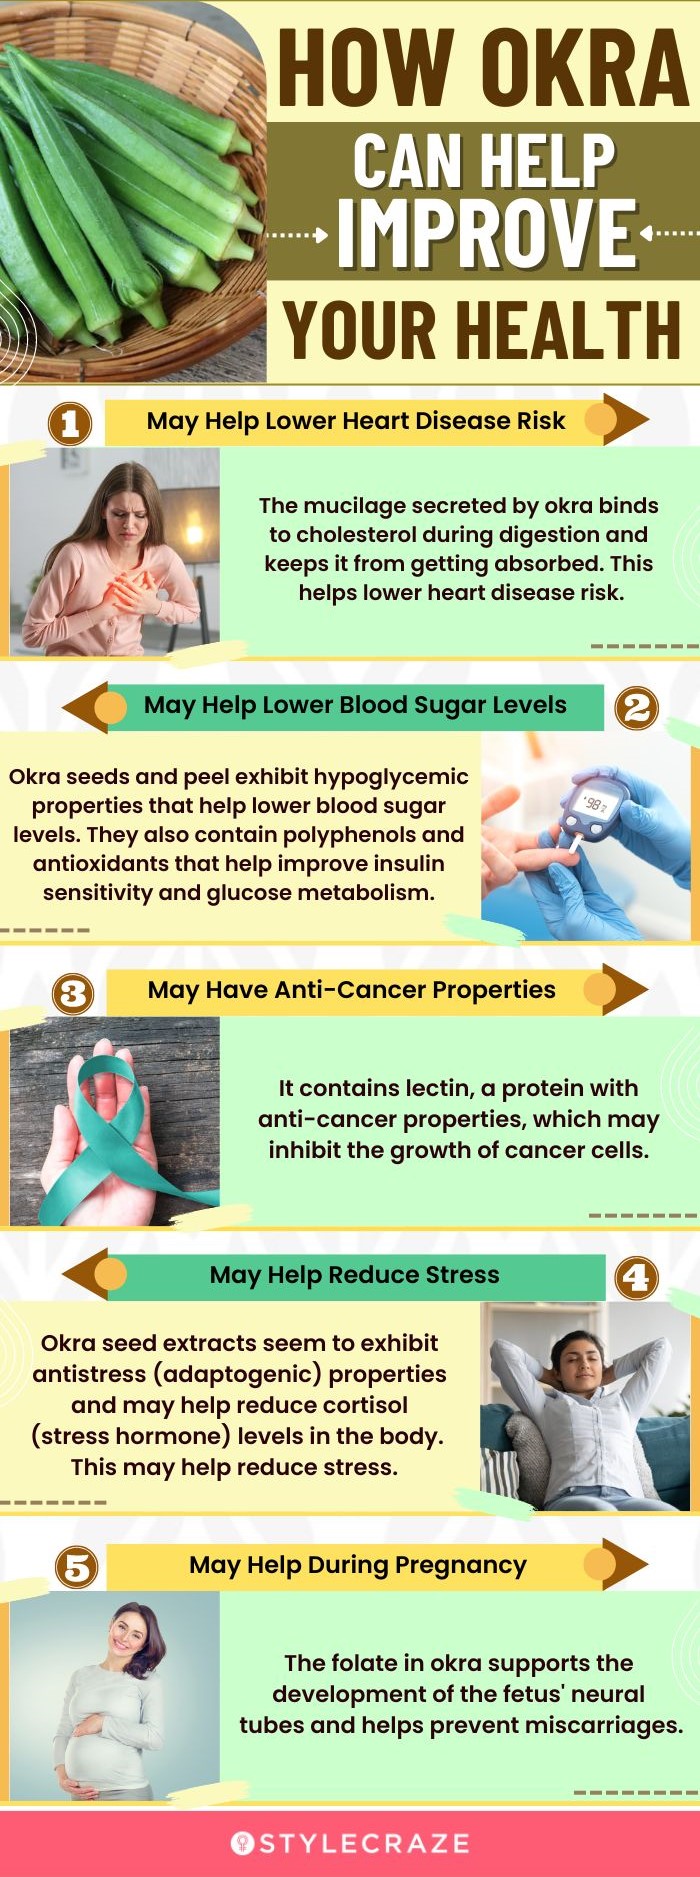 how okra can help improve your health (infographic)